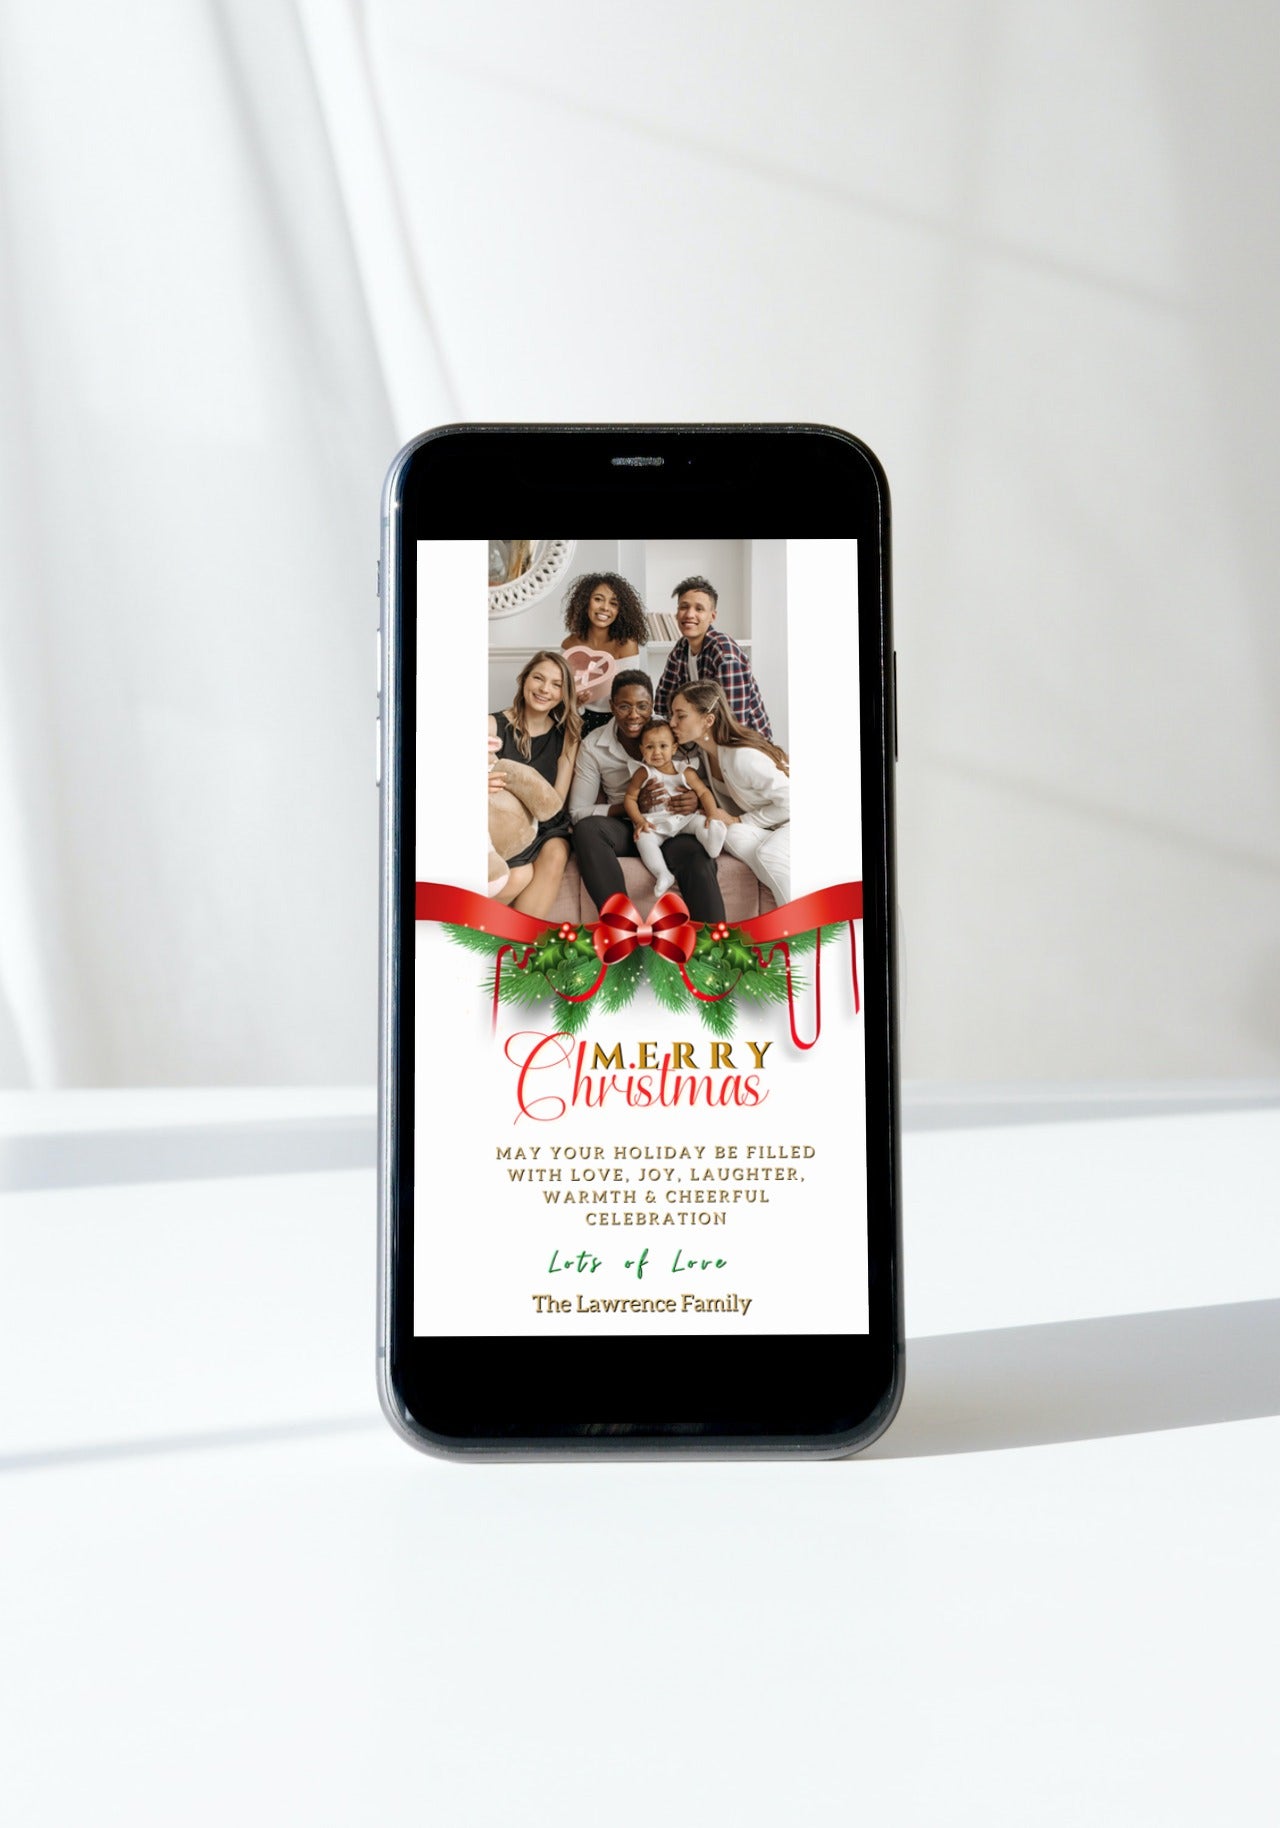 Cell phone displaying a Merry Christmas ecard with a red bow ornament and a family photo.